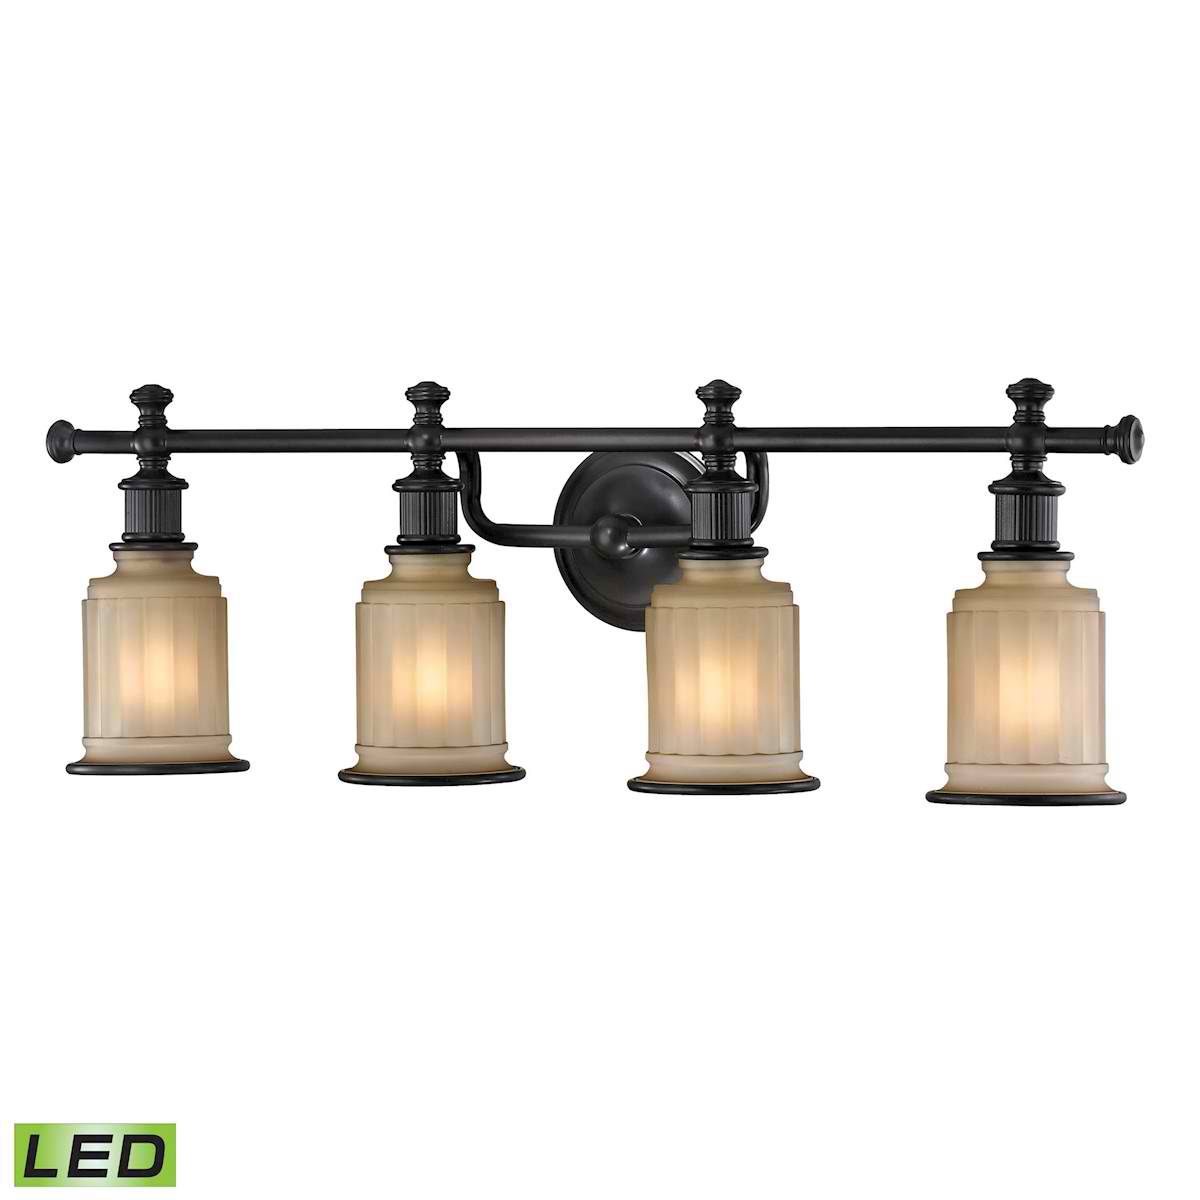 Acadia Collection 4 Light Bath in Oil Rubbed Bronze - LED, 800 Lumens (3200 Lumens Total) with Full